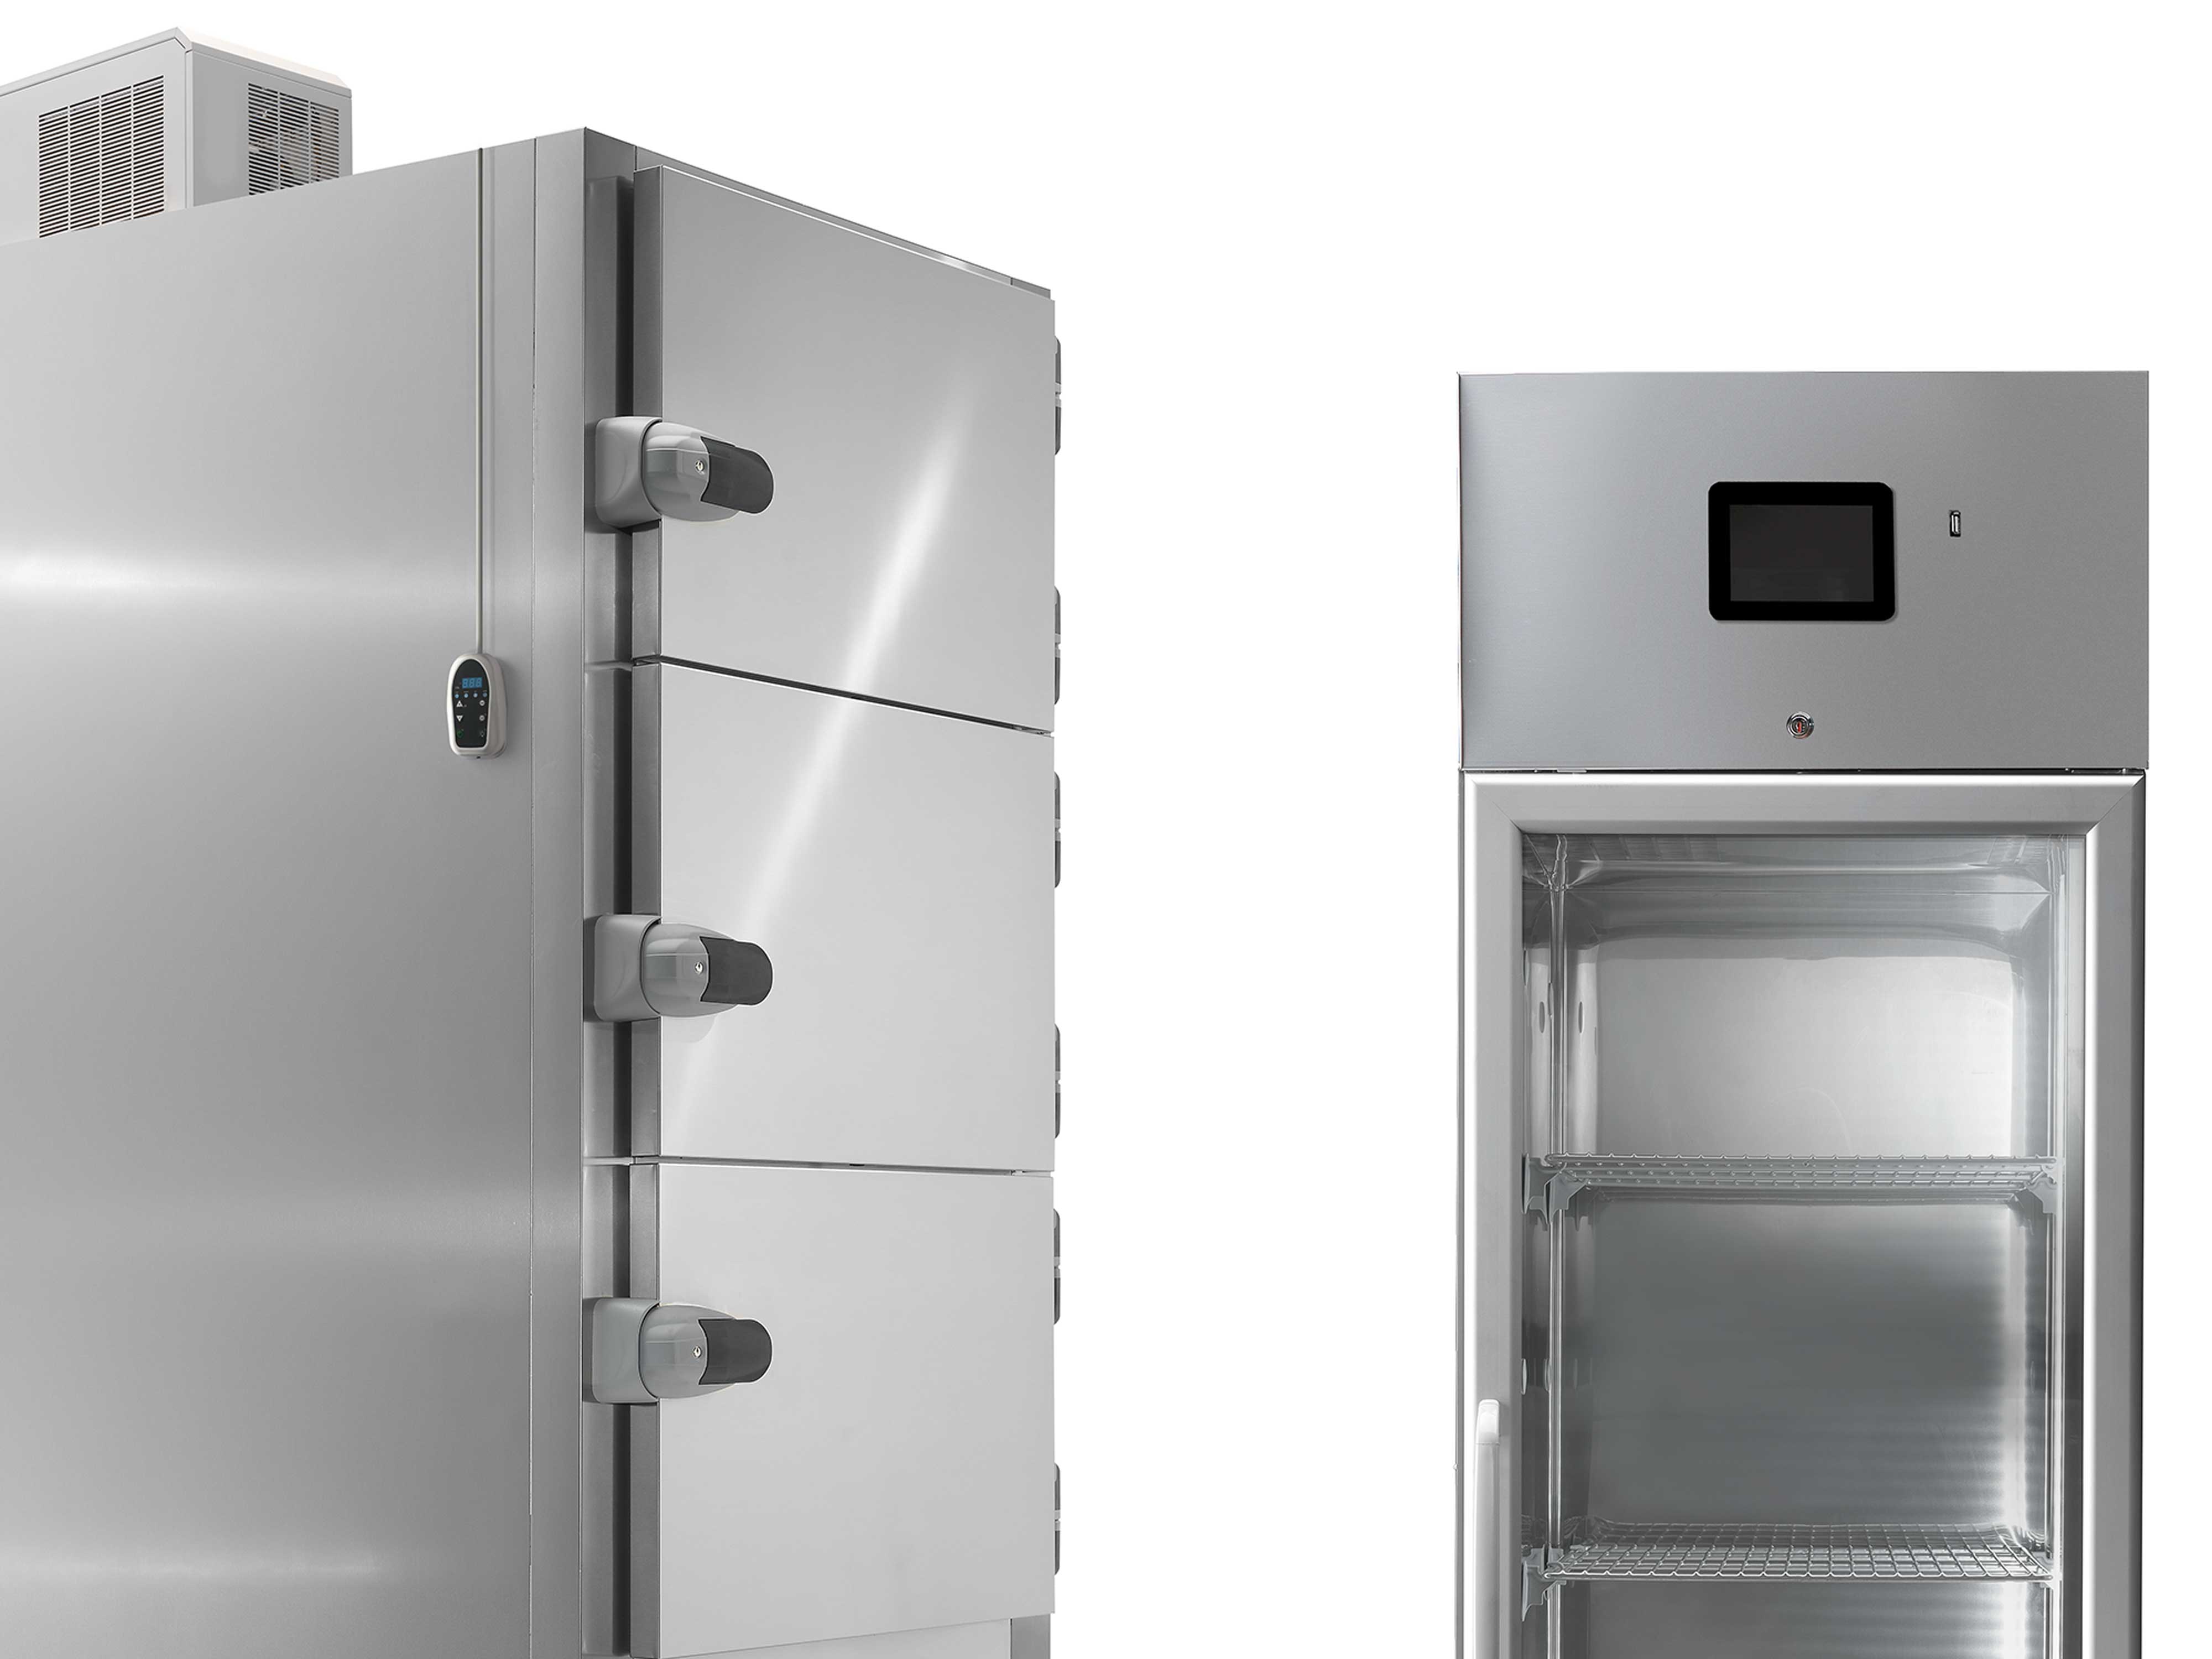  Cold rooms and refrigerated cabinets